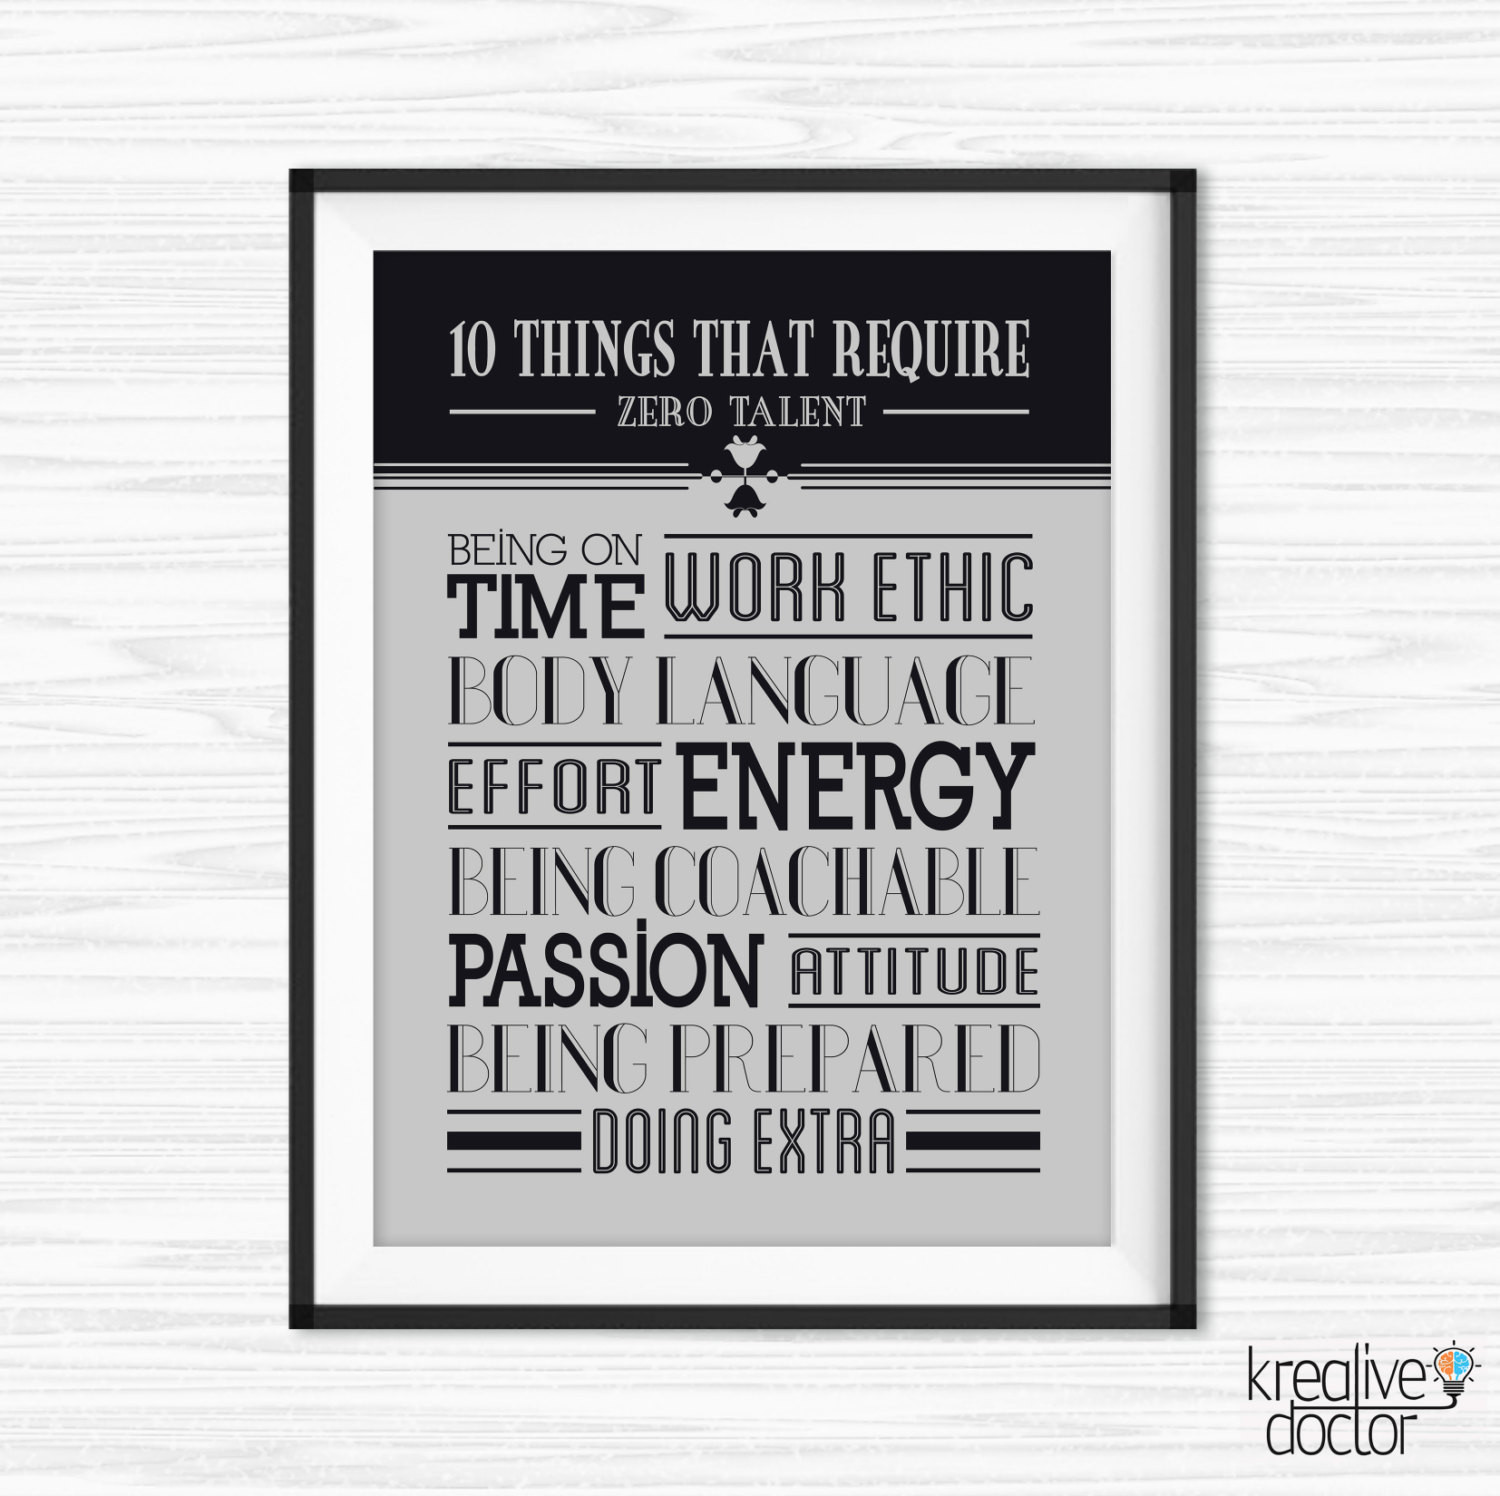 Inspirational Quotes Wall Art
 fice Wall Art Cubicle Decor Success Quote Motivational Wall